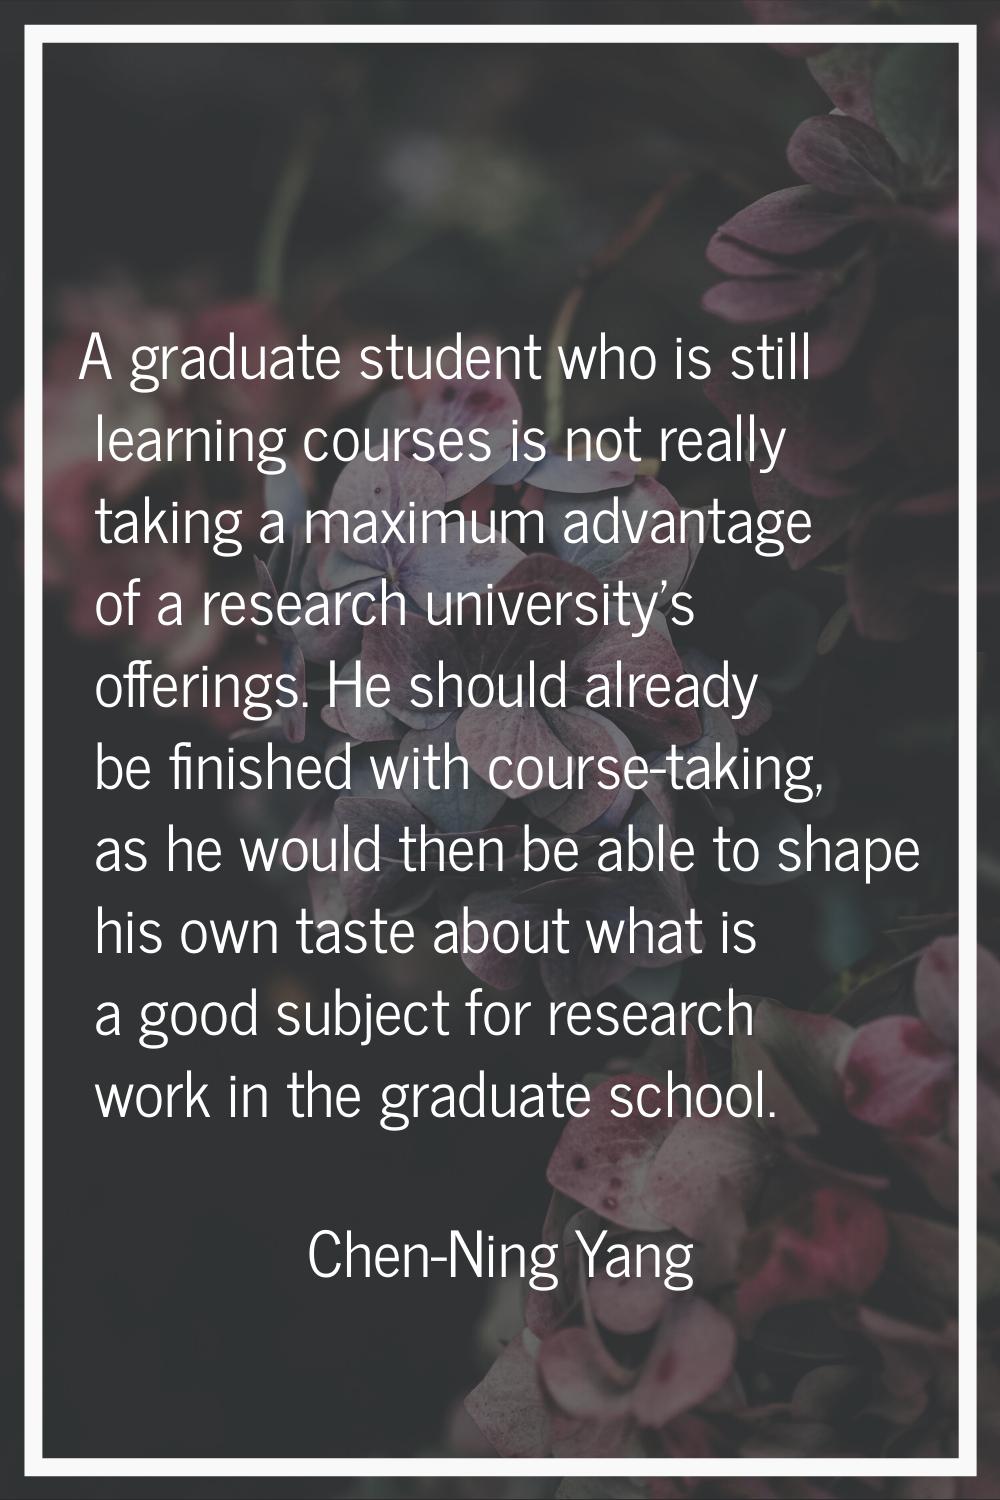 A graduate student who is still learning courses is not really taking a maximum advantage of a rese